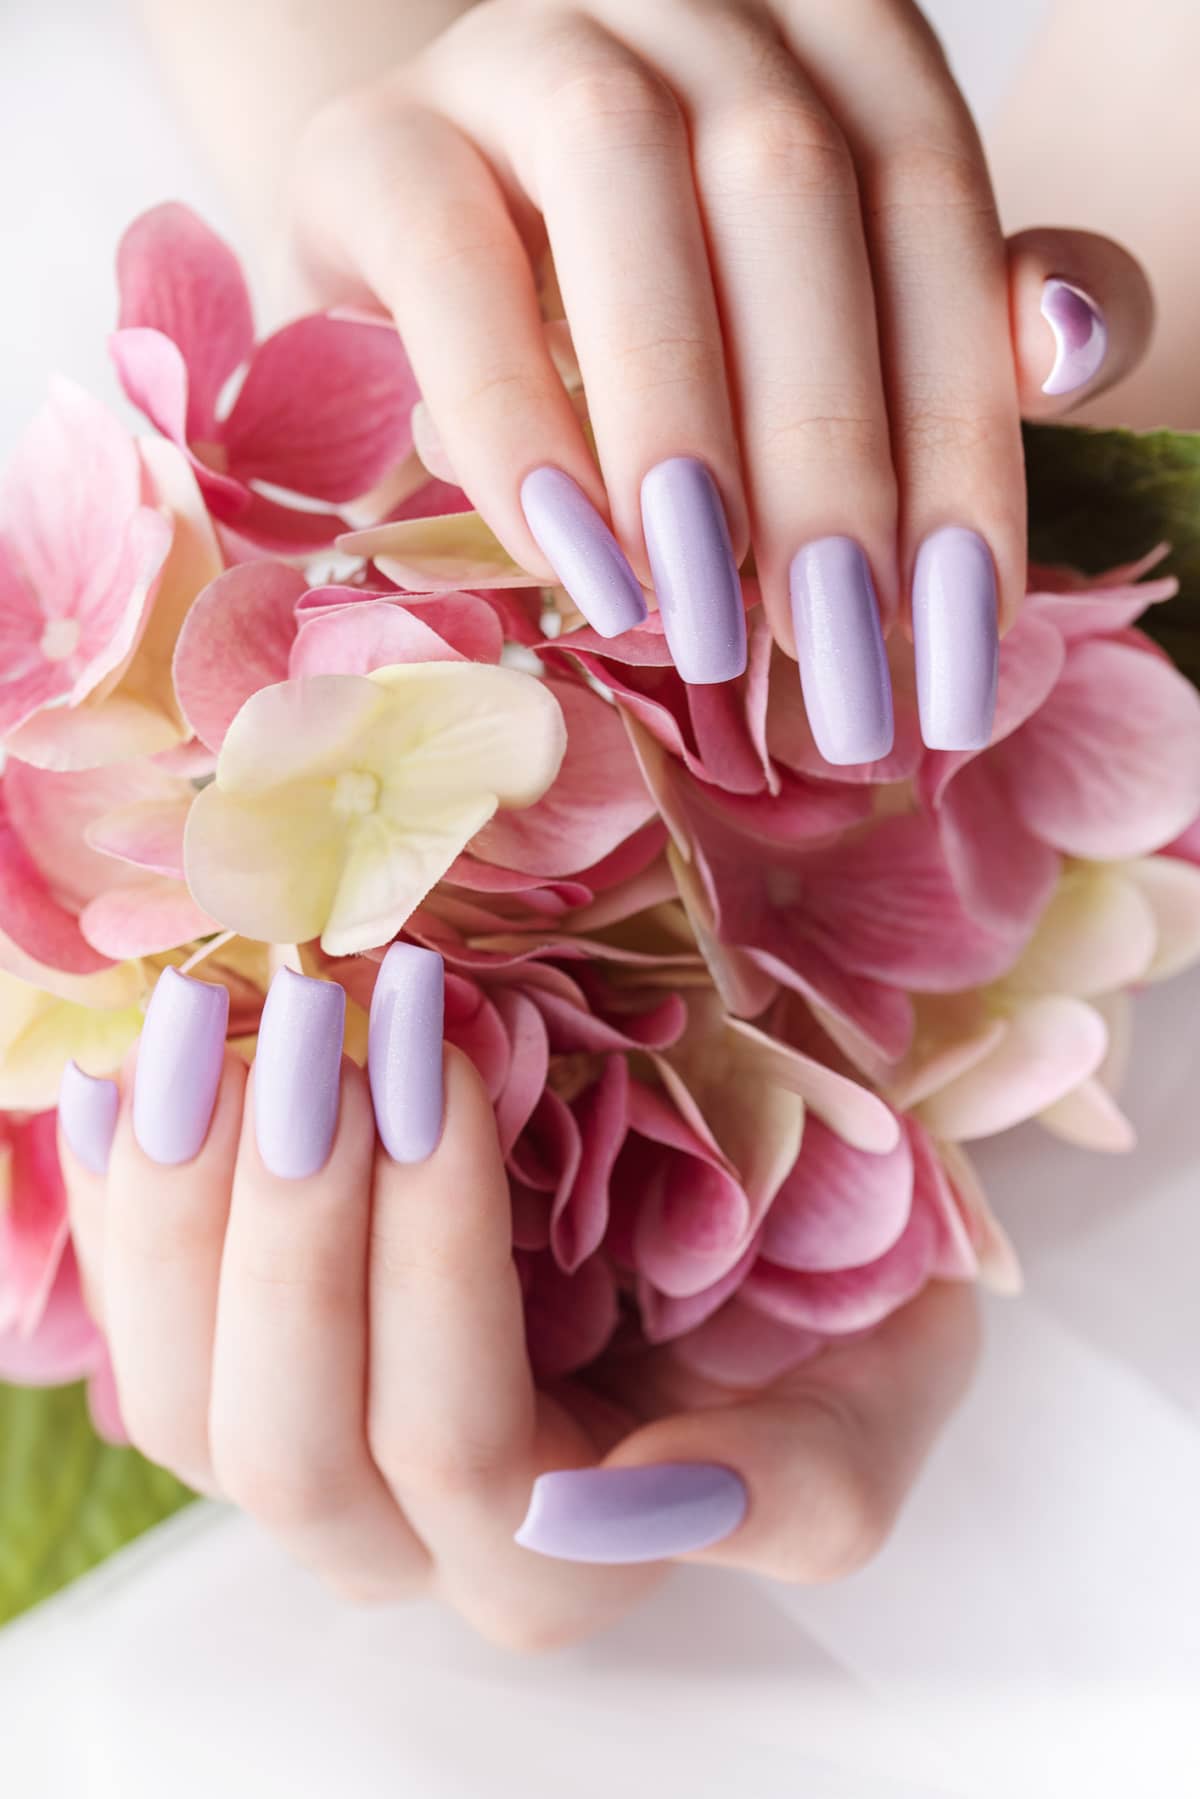 Girl's hands with delicate purple manicure and hydrangea flowers.